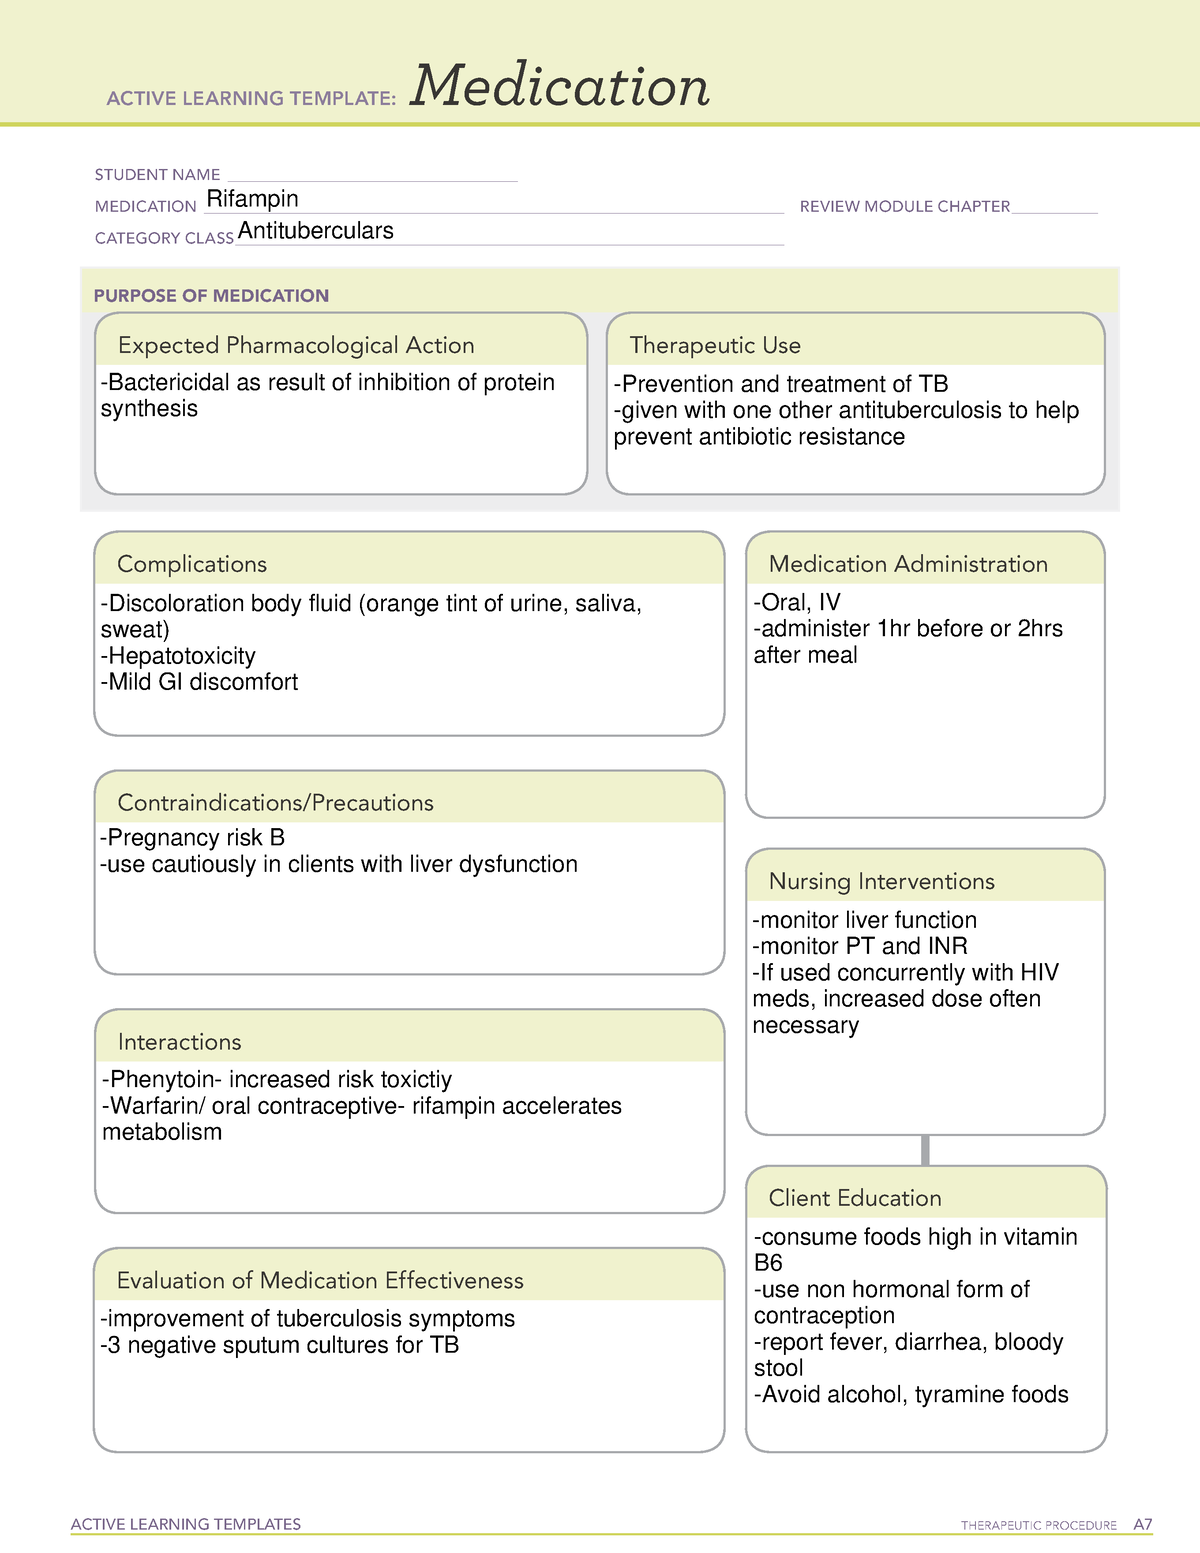 Active Learning Template medication Rifampin ACTIVE LEARNING